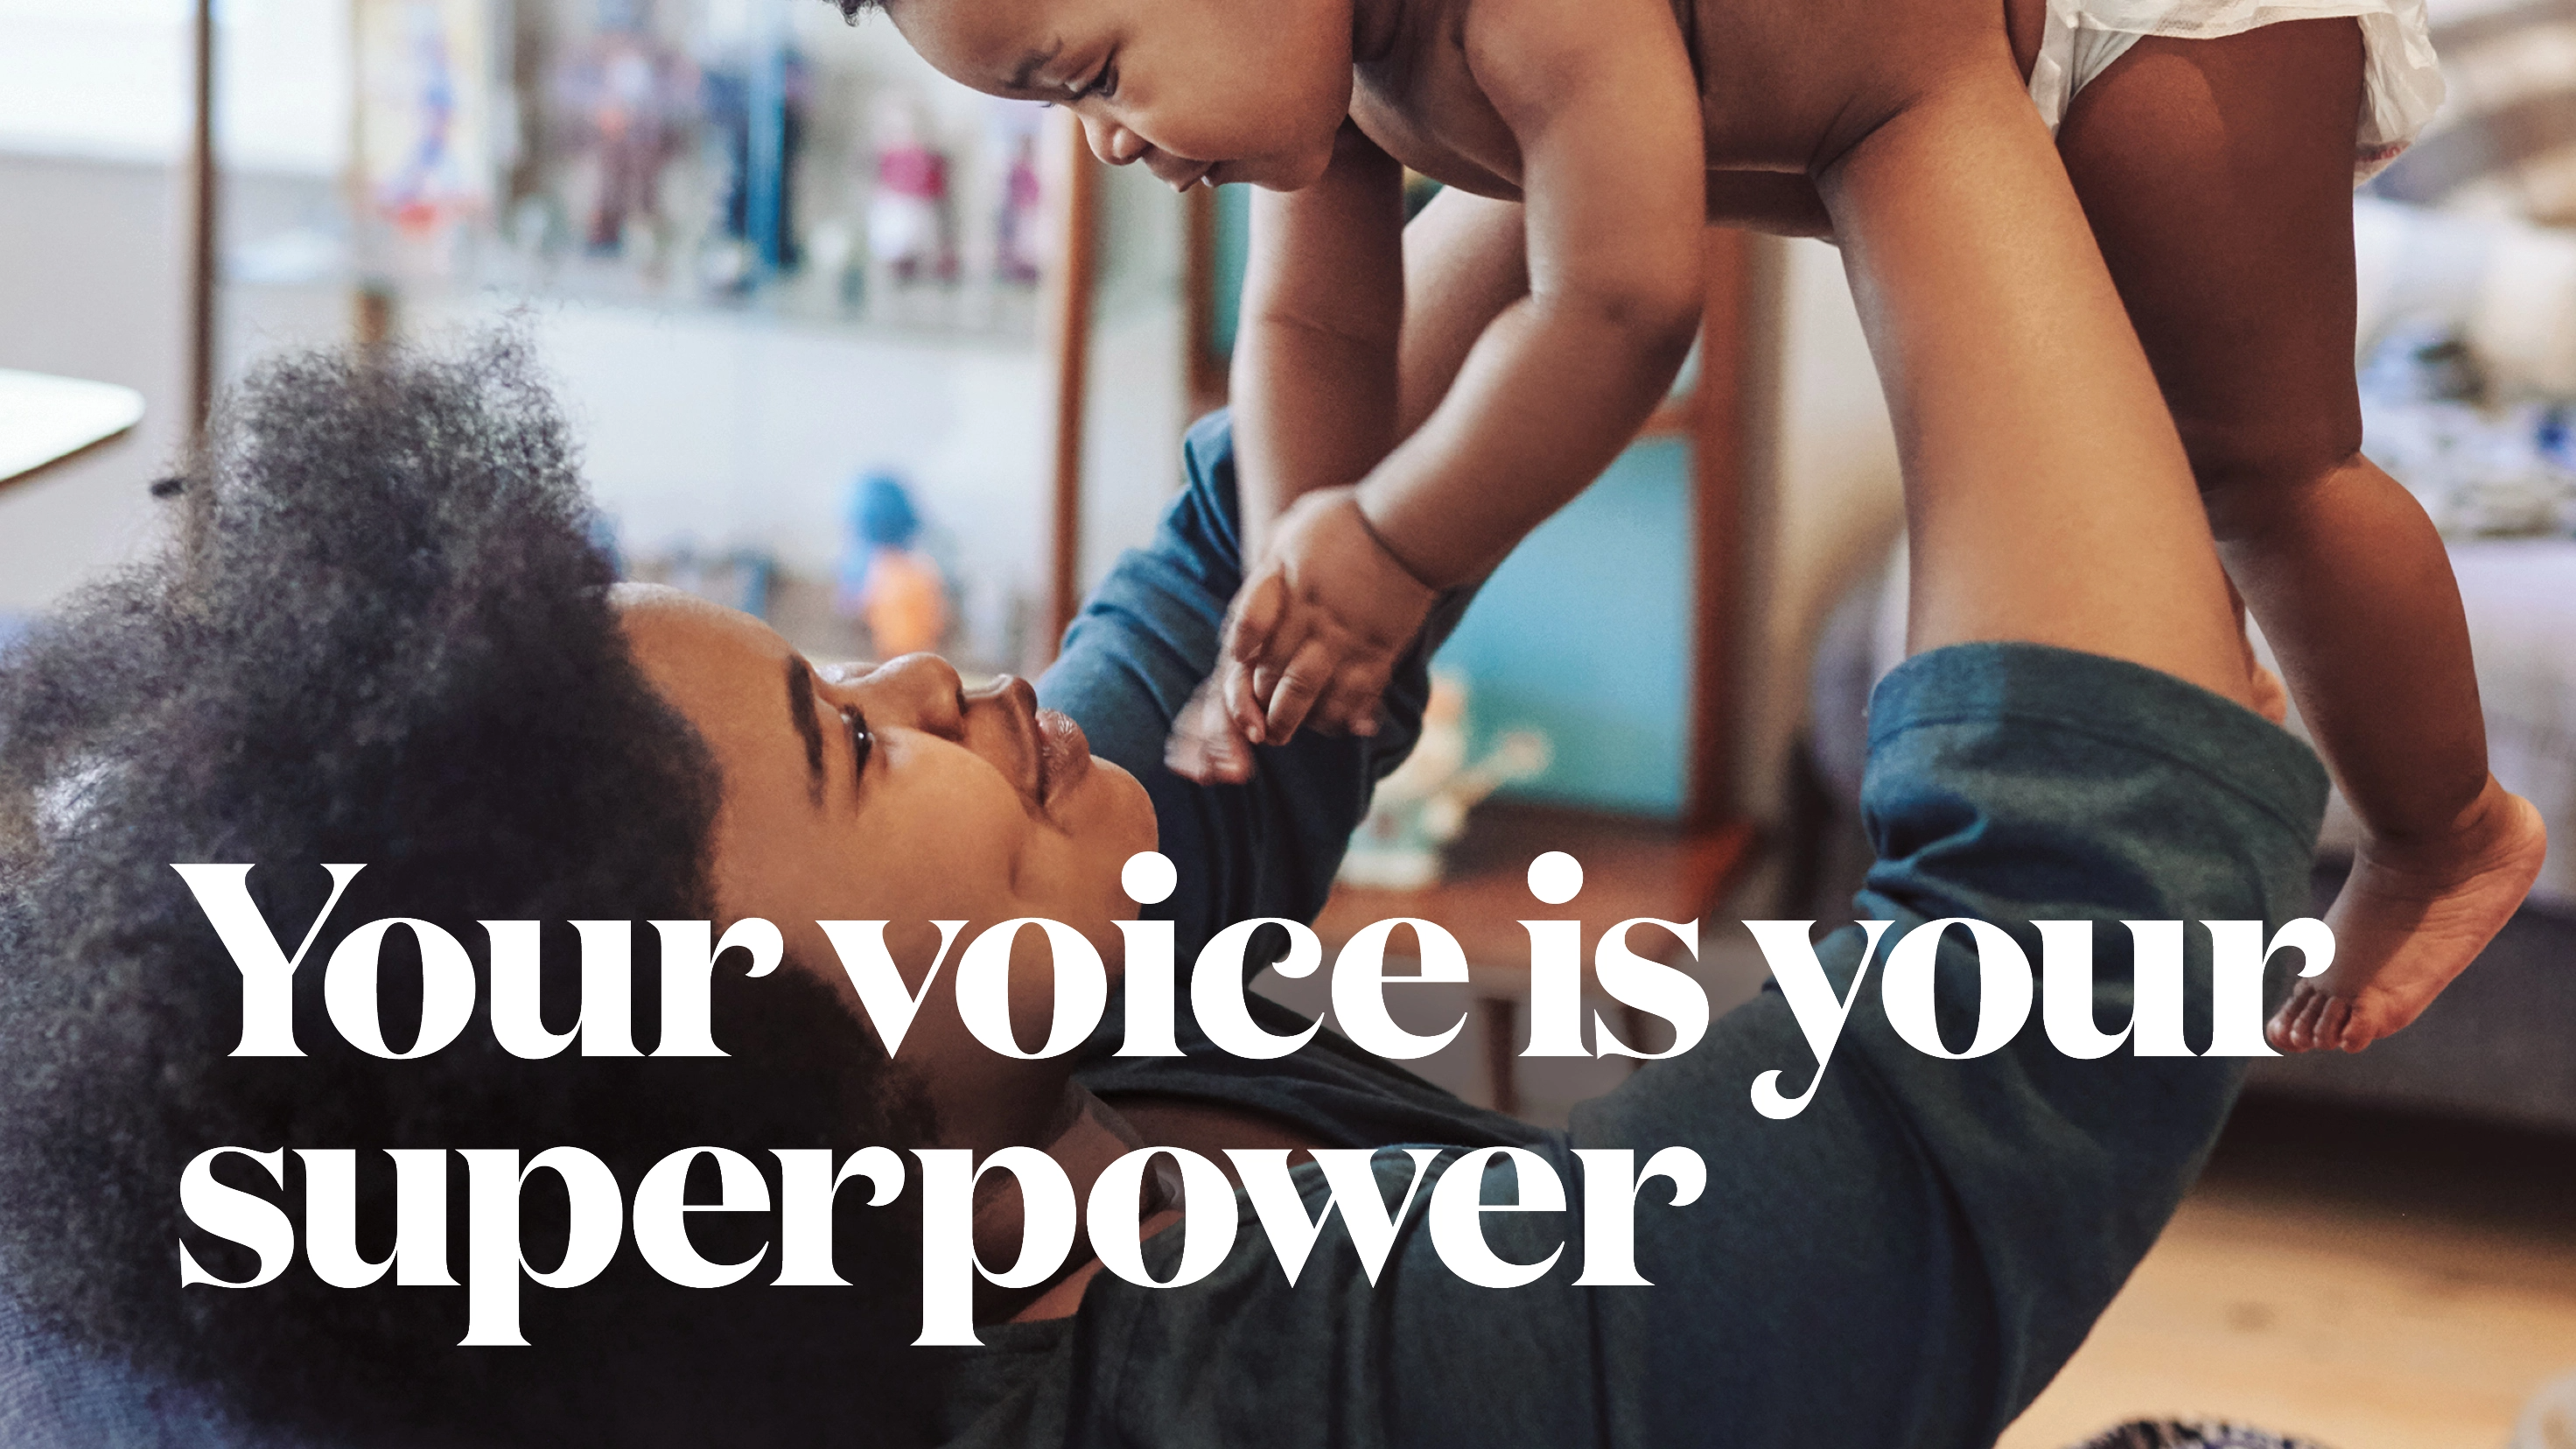 A new parent holds their infant with text reading "Your voice is your superpower".